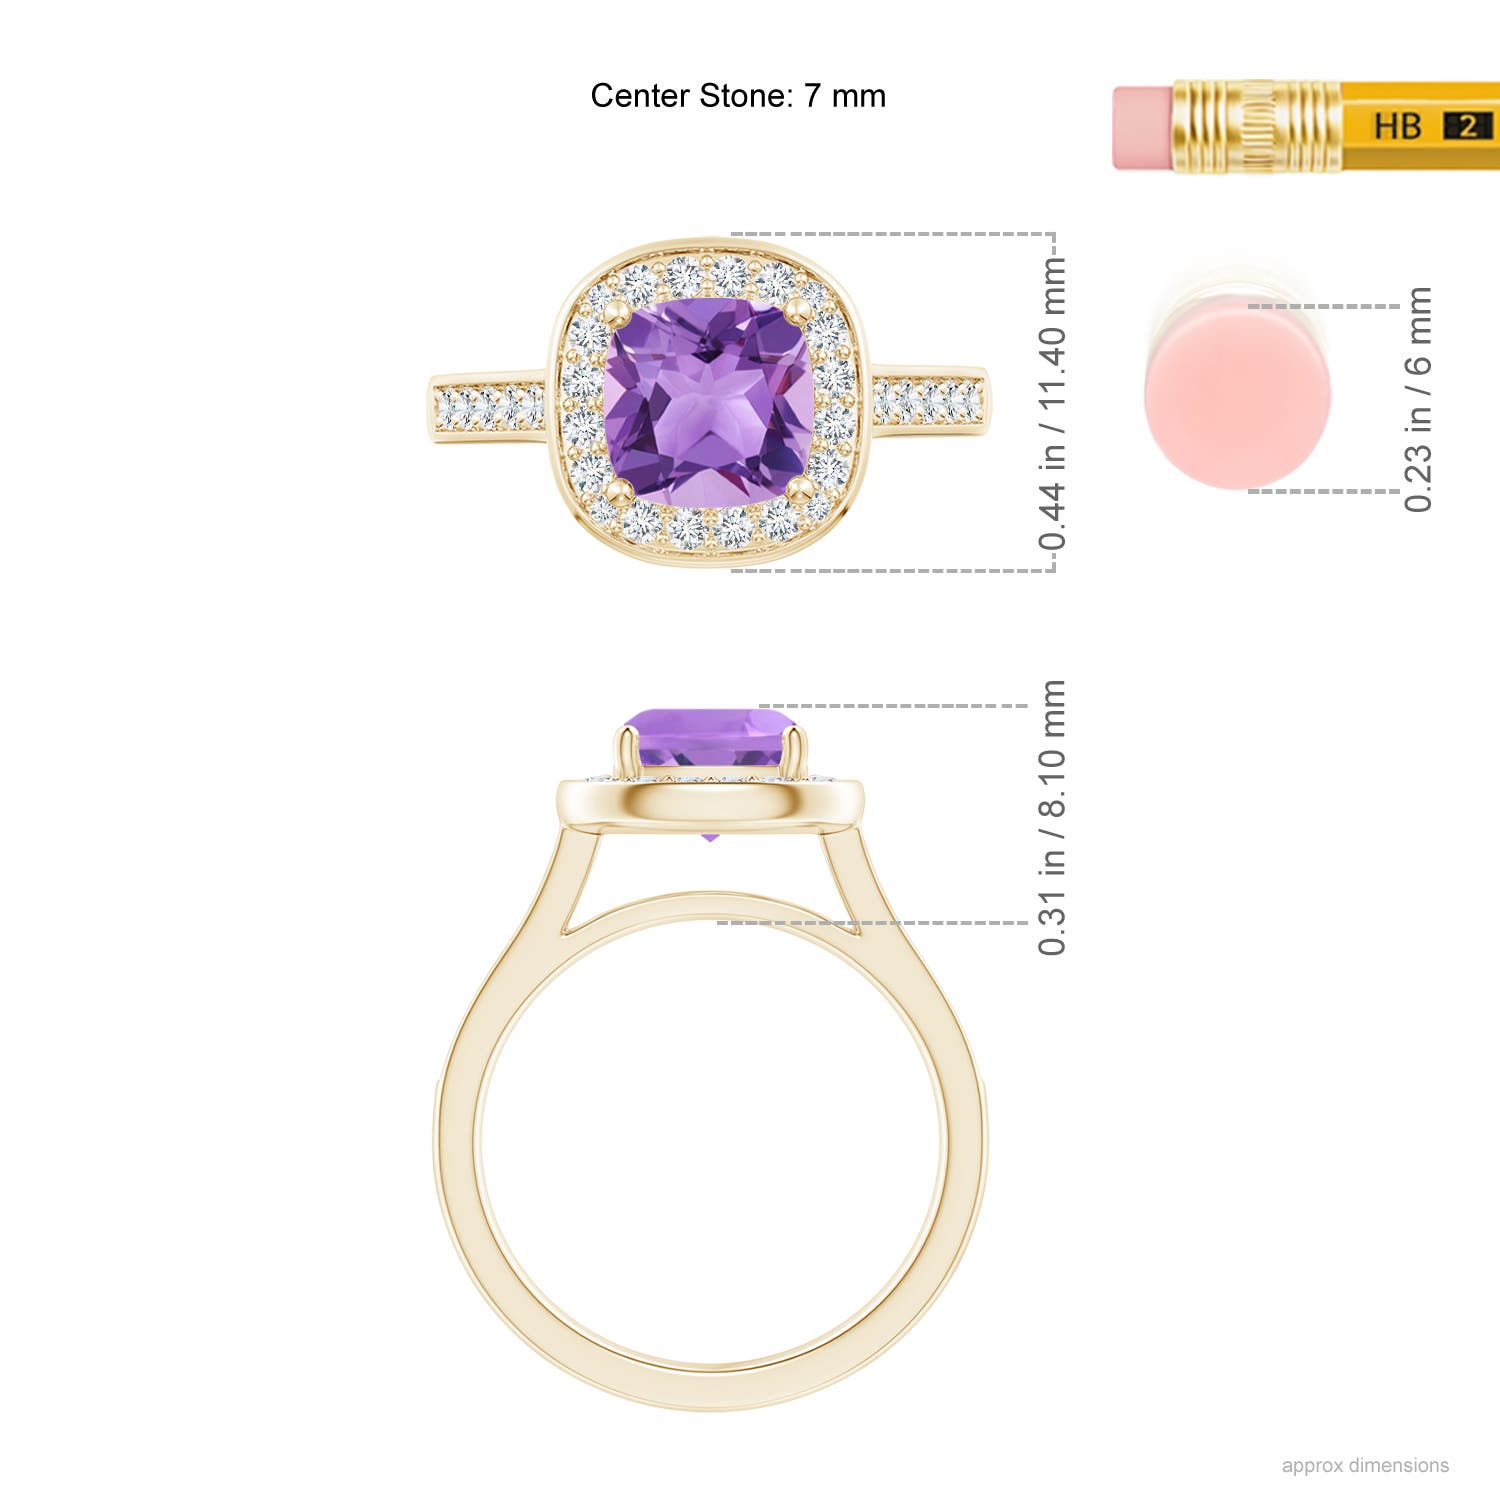 A - Amethyst / 1.74 CT / 14 KT Yellow Gold